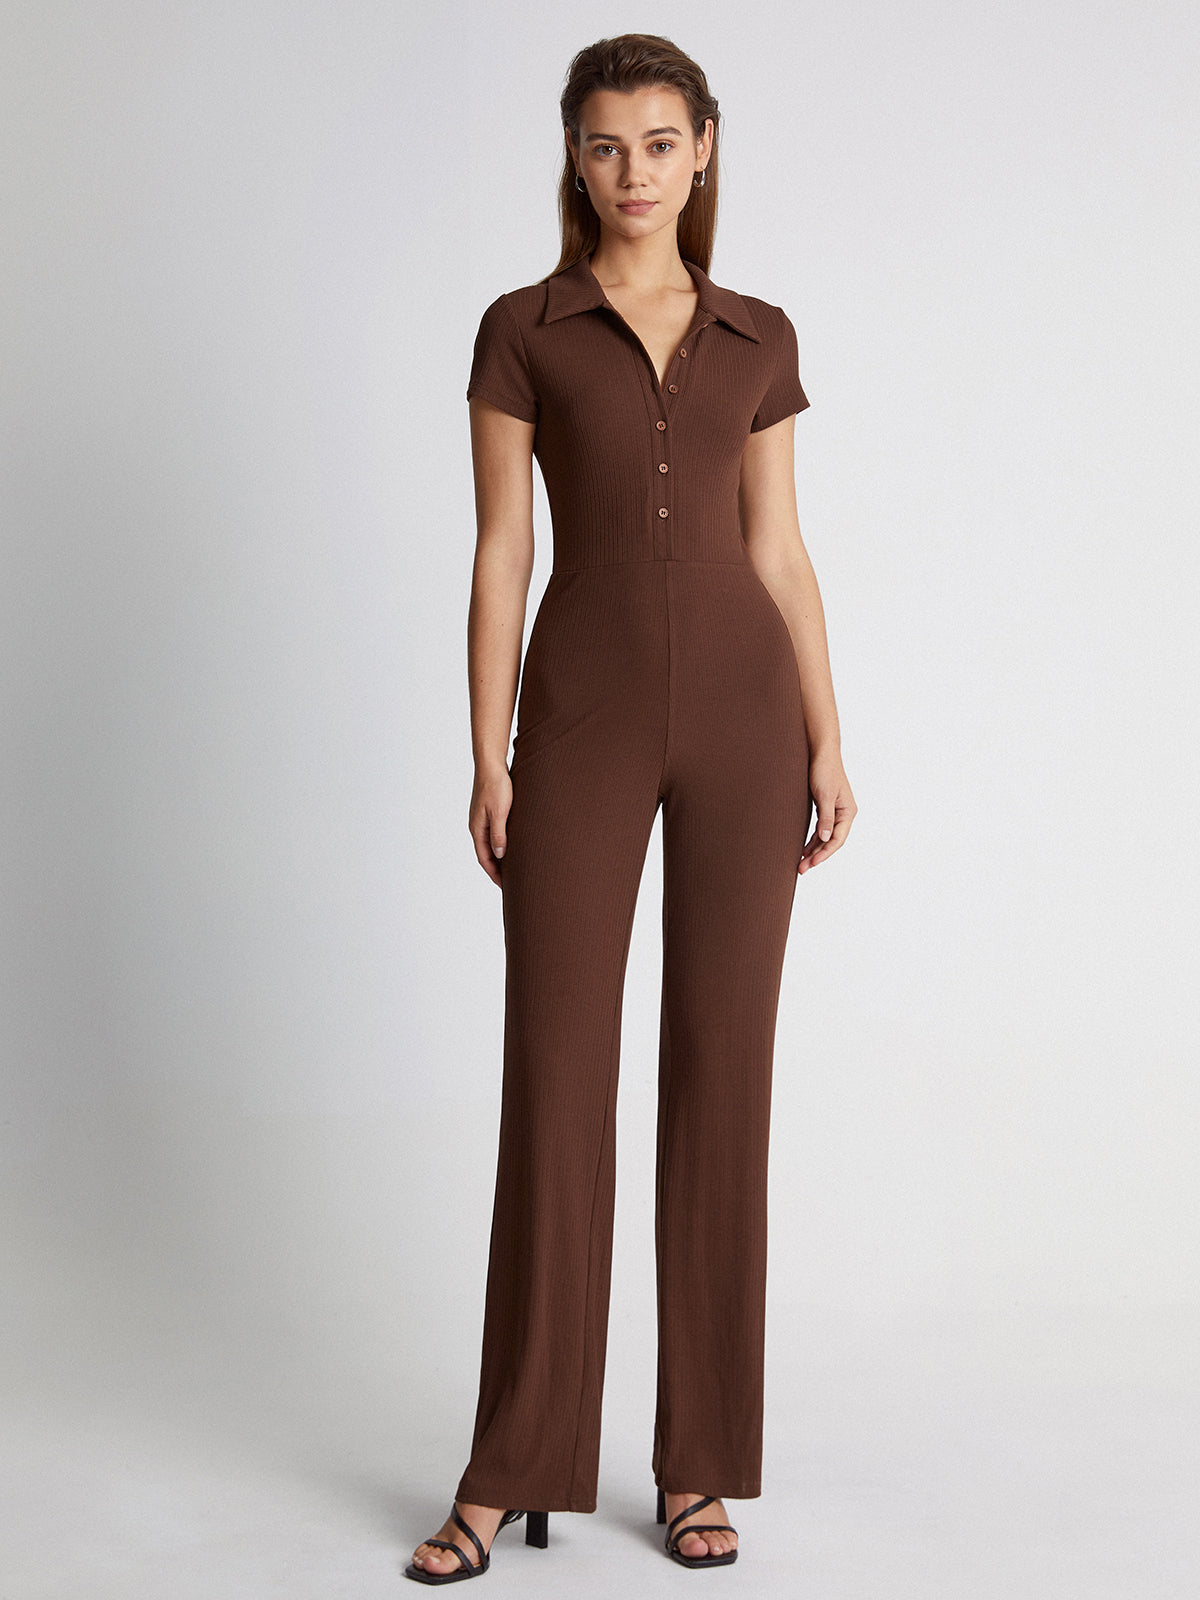 Short Sleeve Ribbed Button Front Collared Straight Leg Jumpsuit